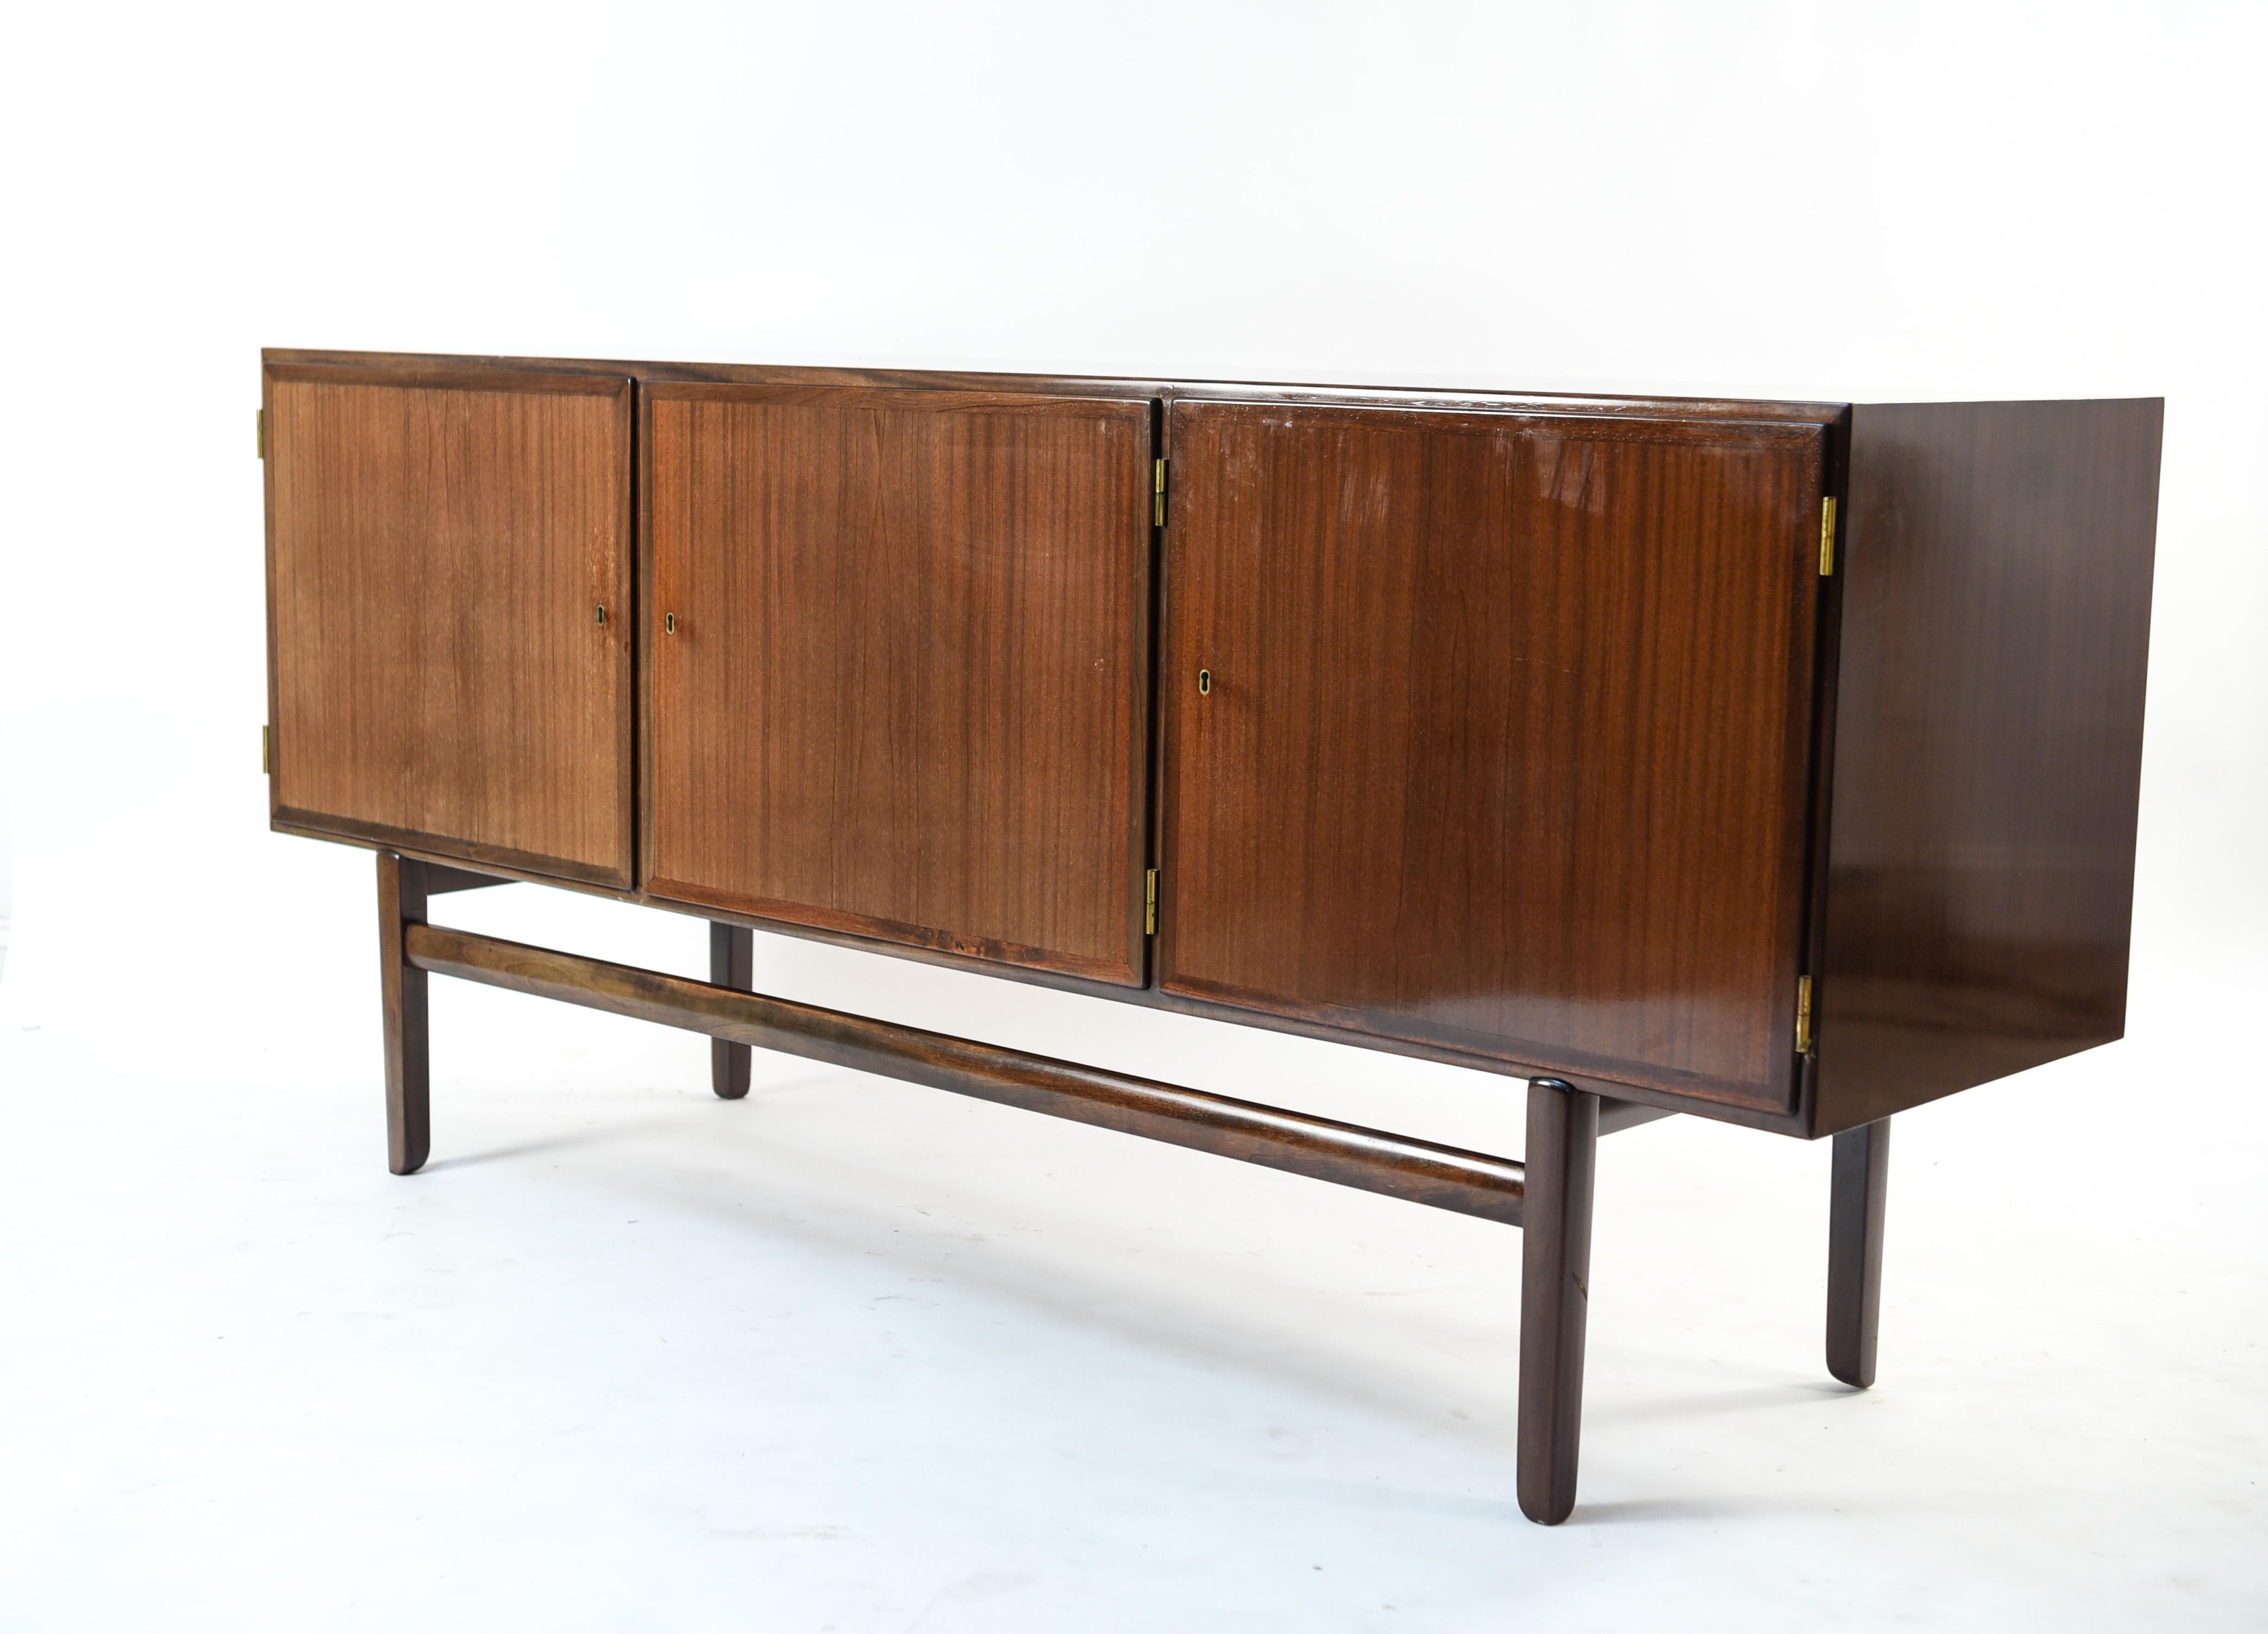 Ole Wanscher for Poul Jeppesen Rungstedlund Mahogany Sideboard 1